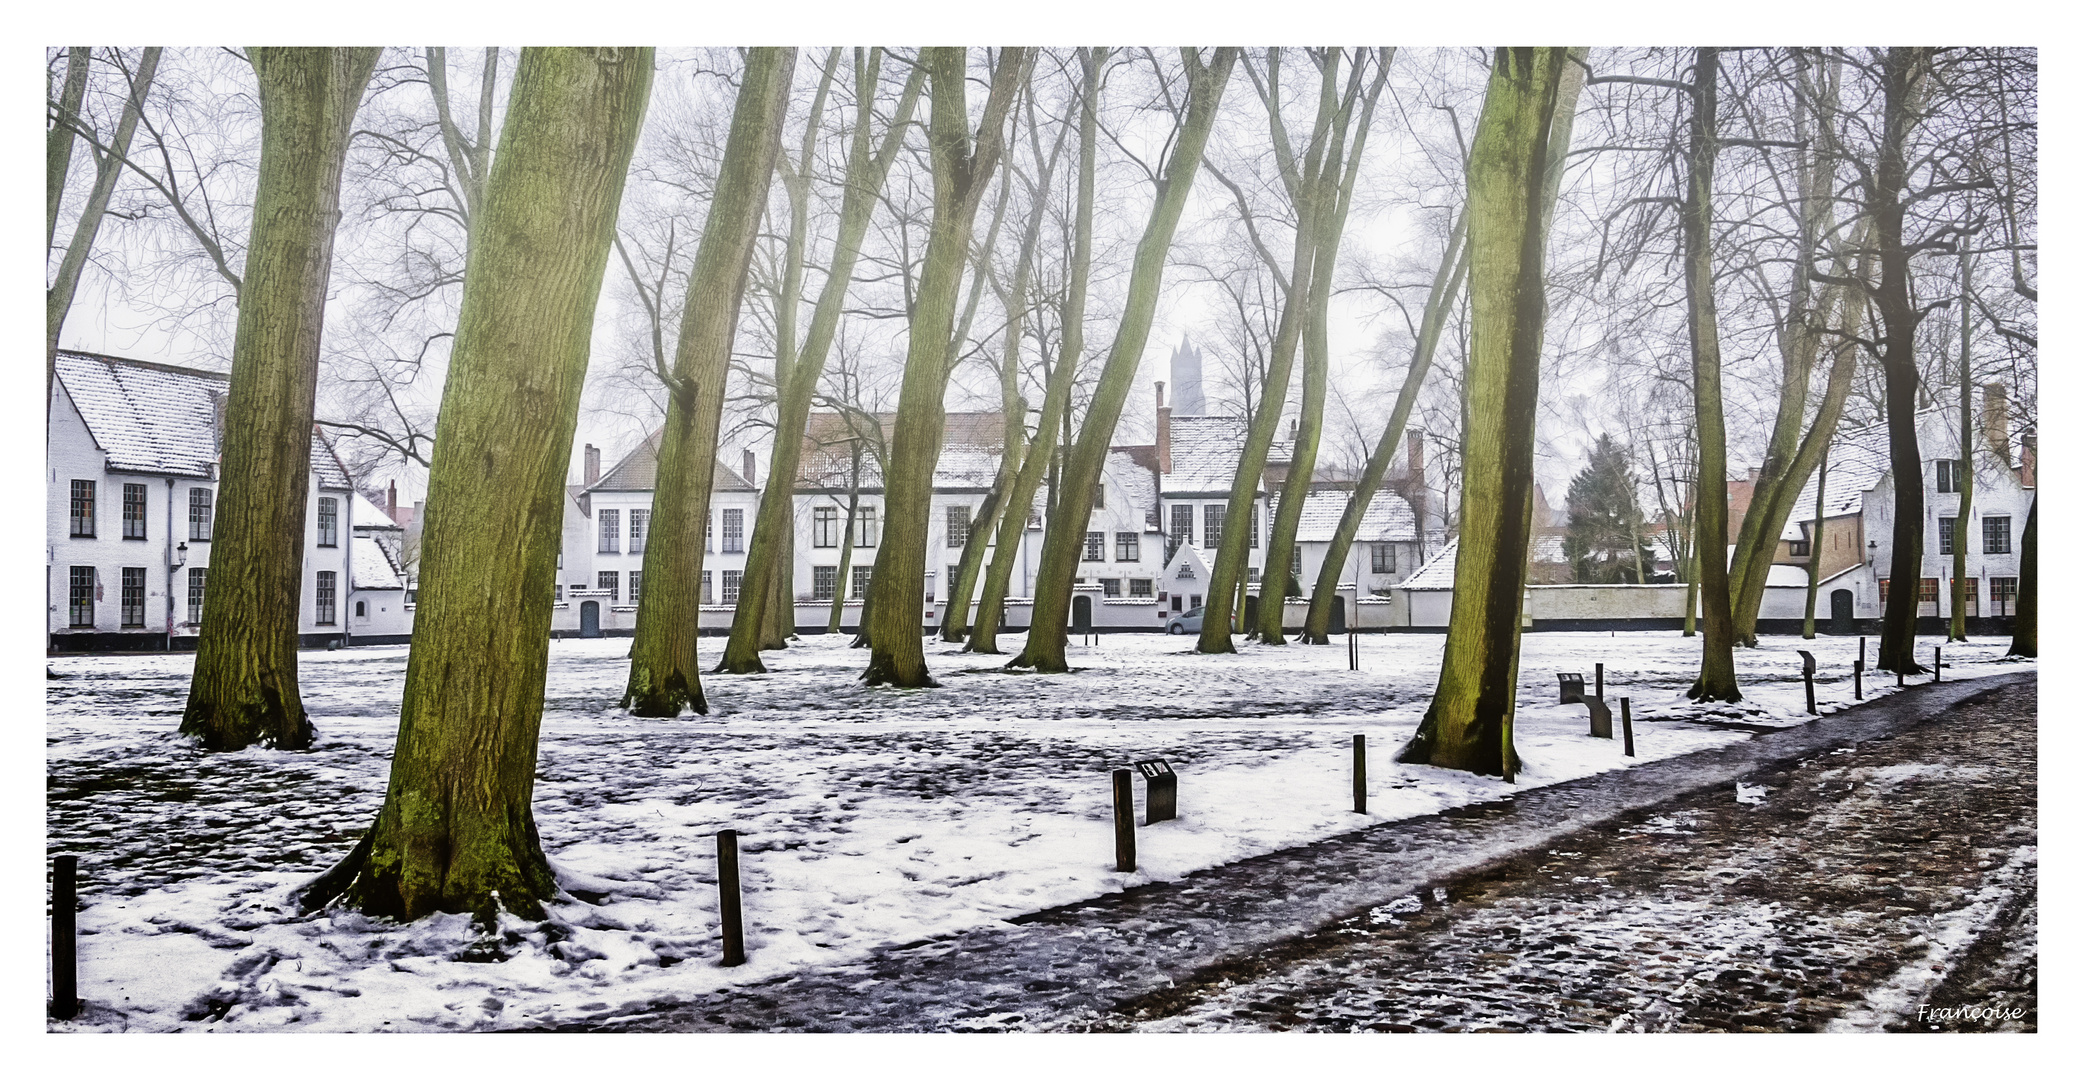 B commme .... Beguinage